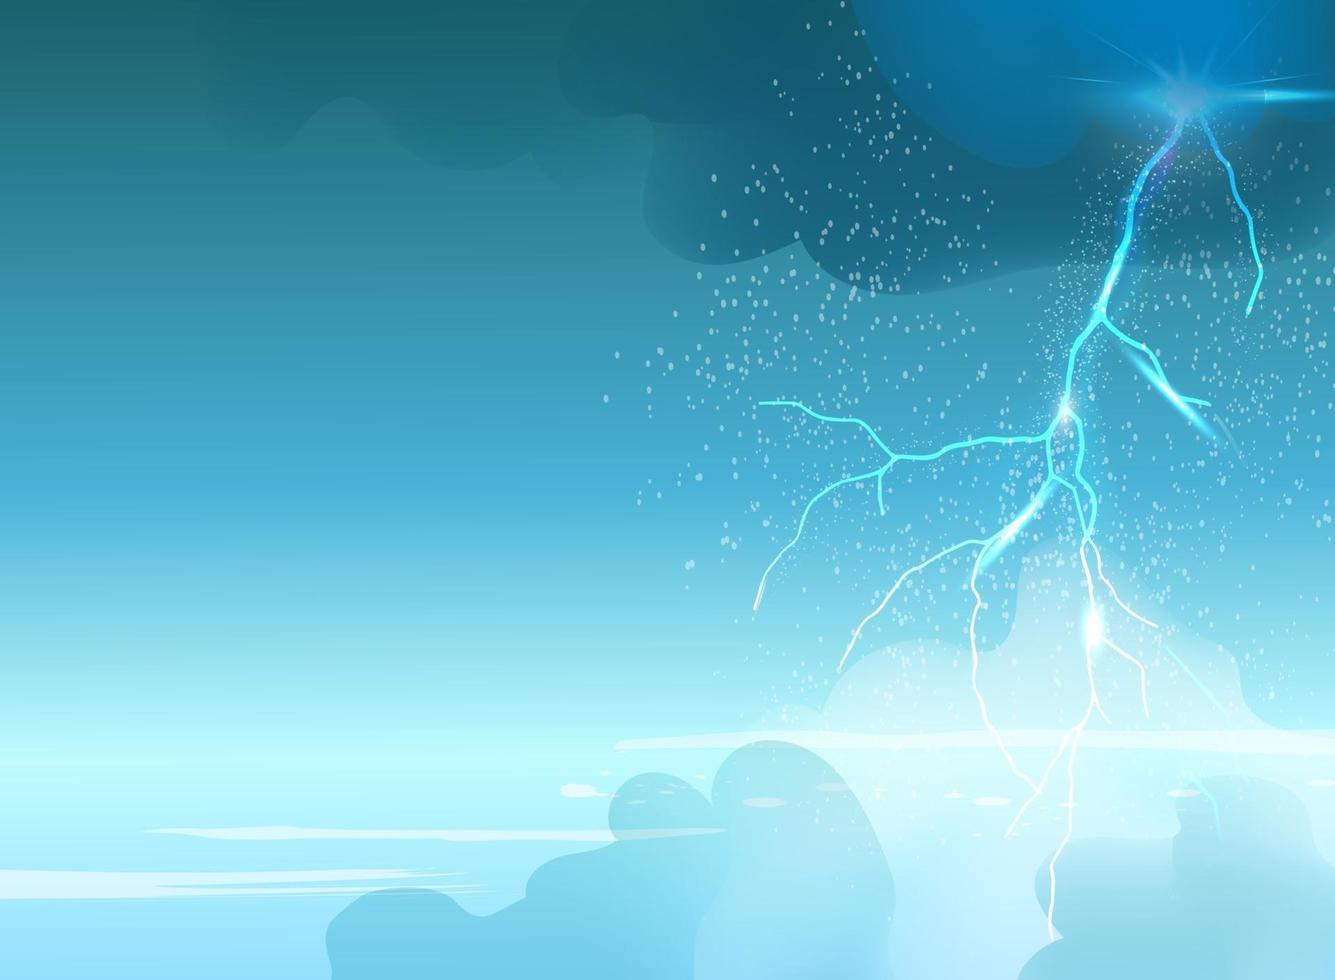 Thunderstorm Background With Cloud and Lightning. vector